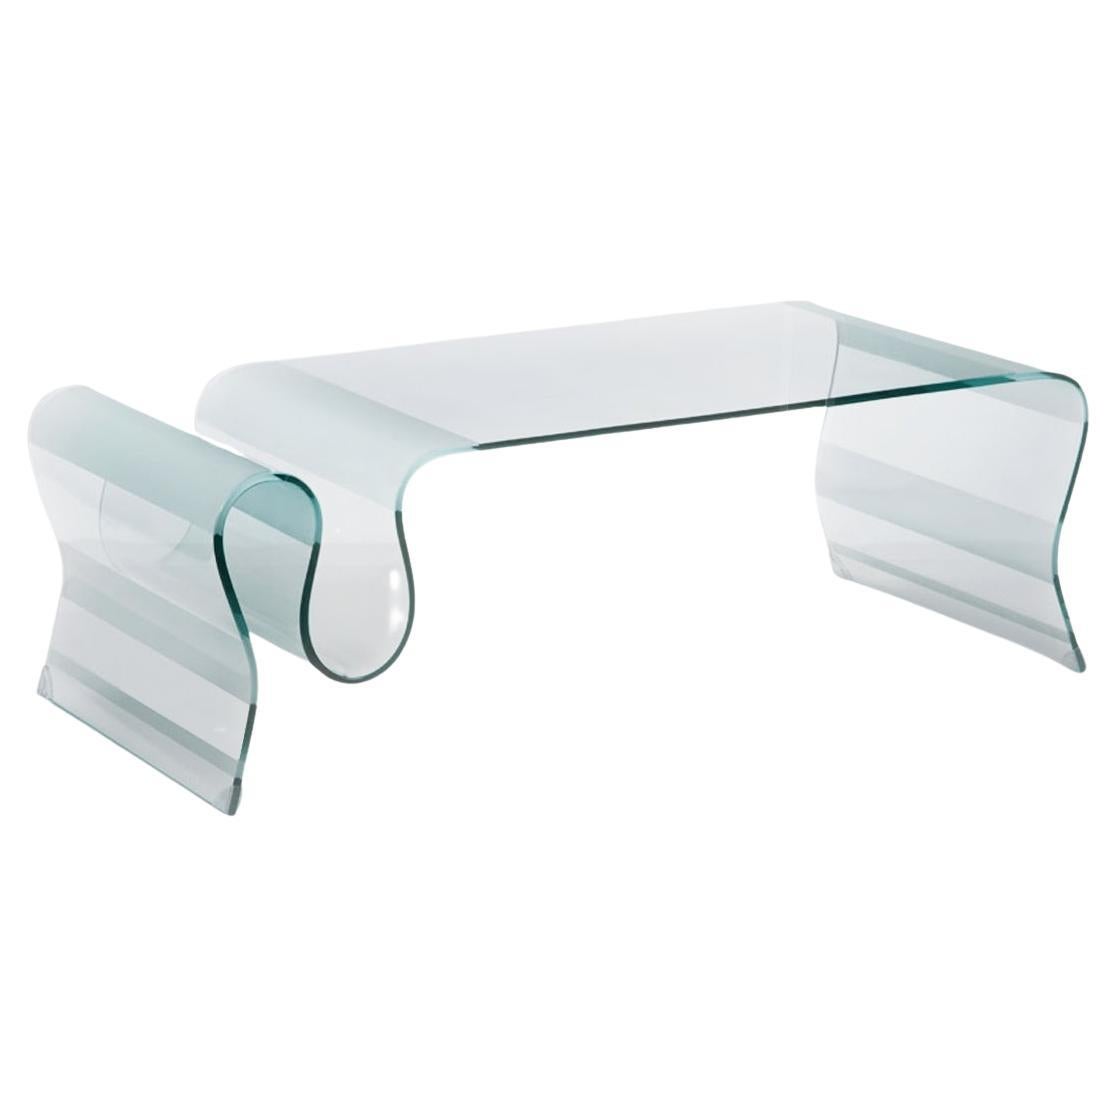 1980s Undulating Glass Coffee Table With Frosted Accents